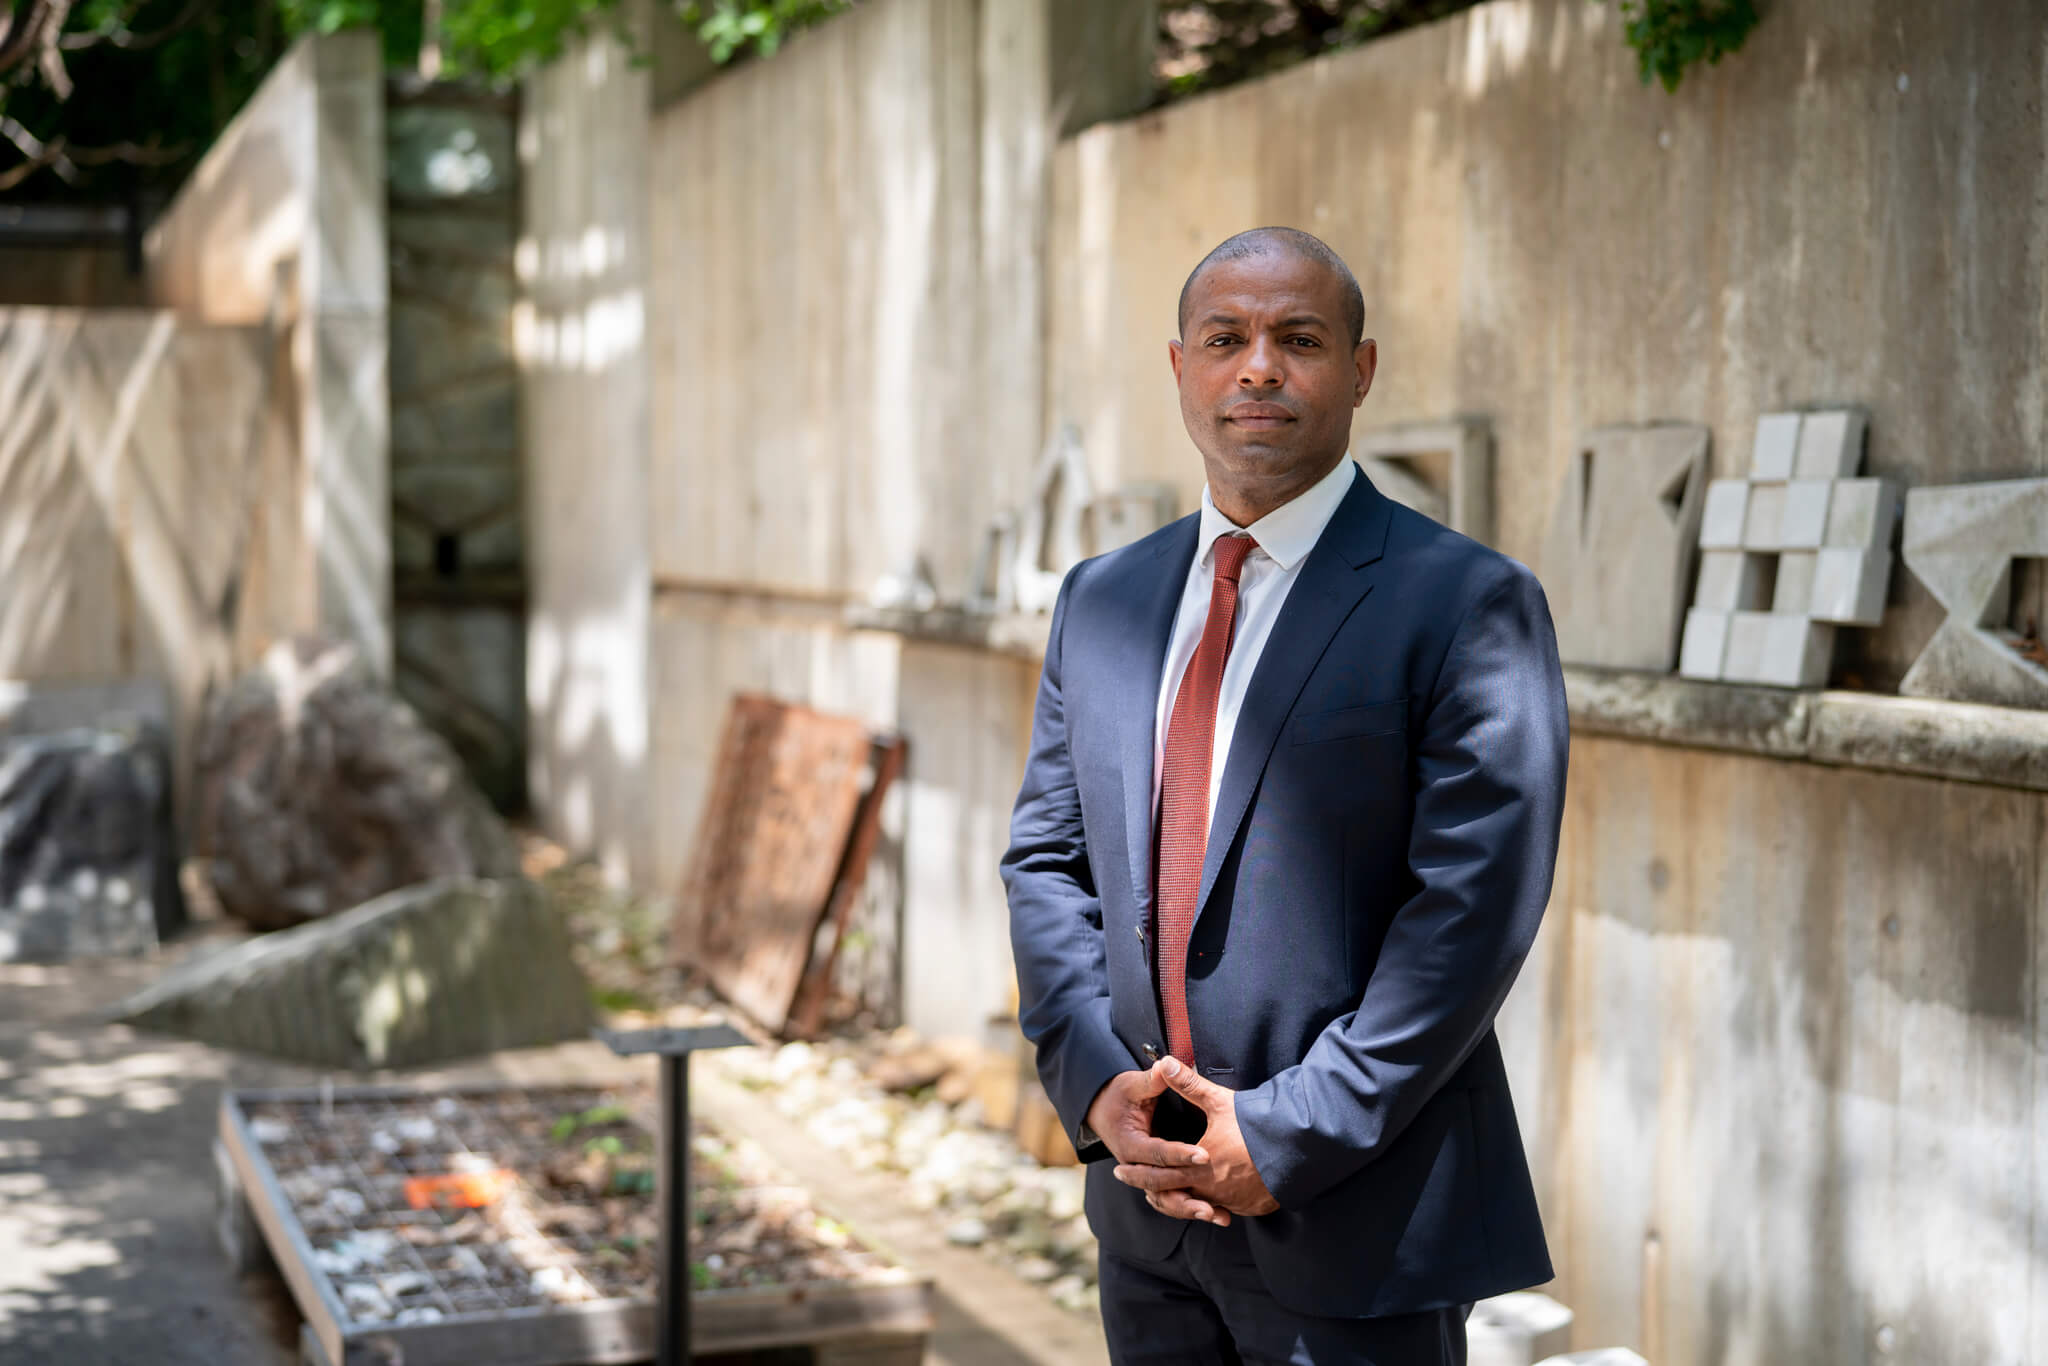 a new dean in a suit and tie against a stone wall